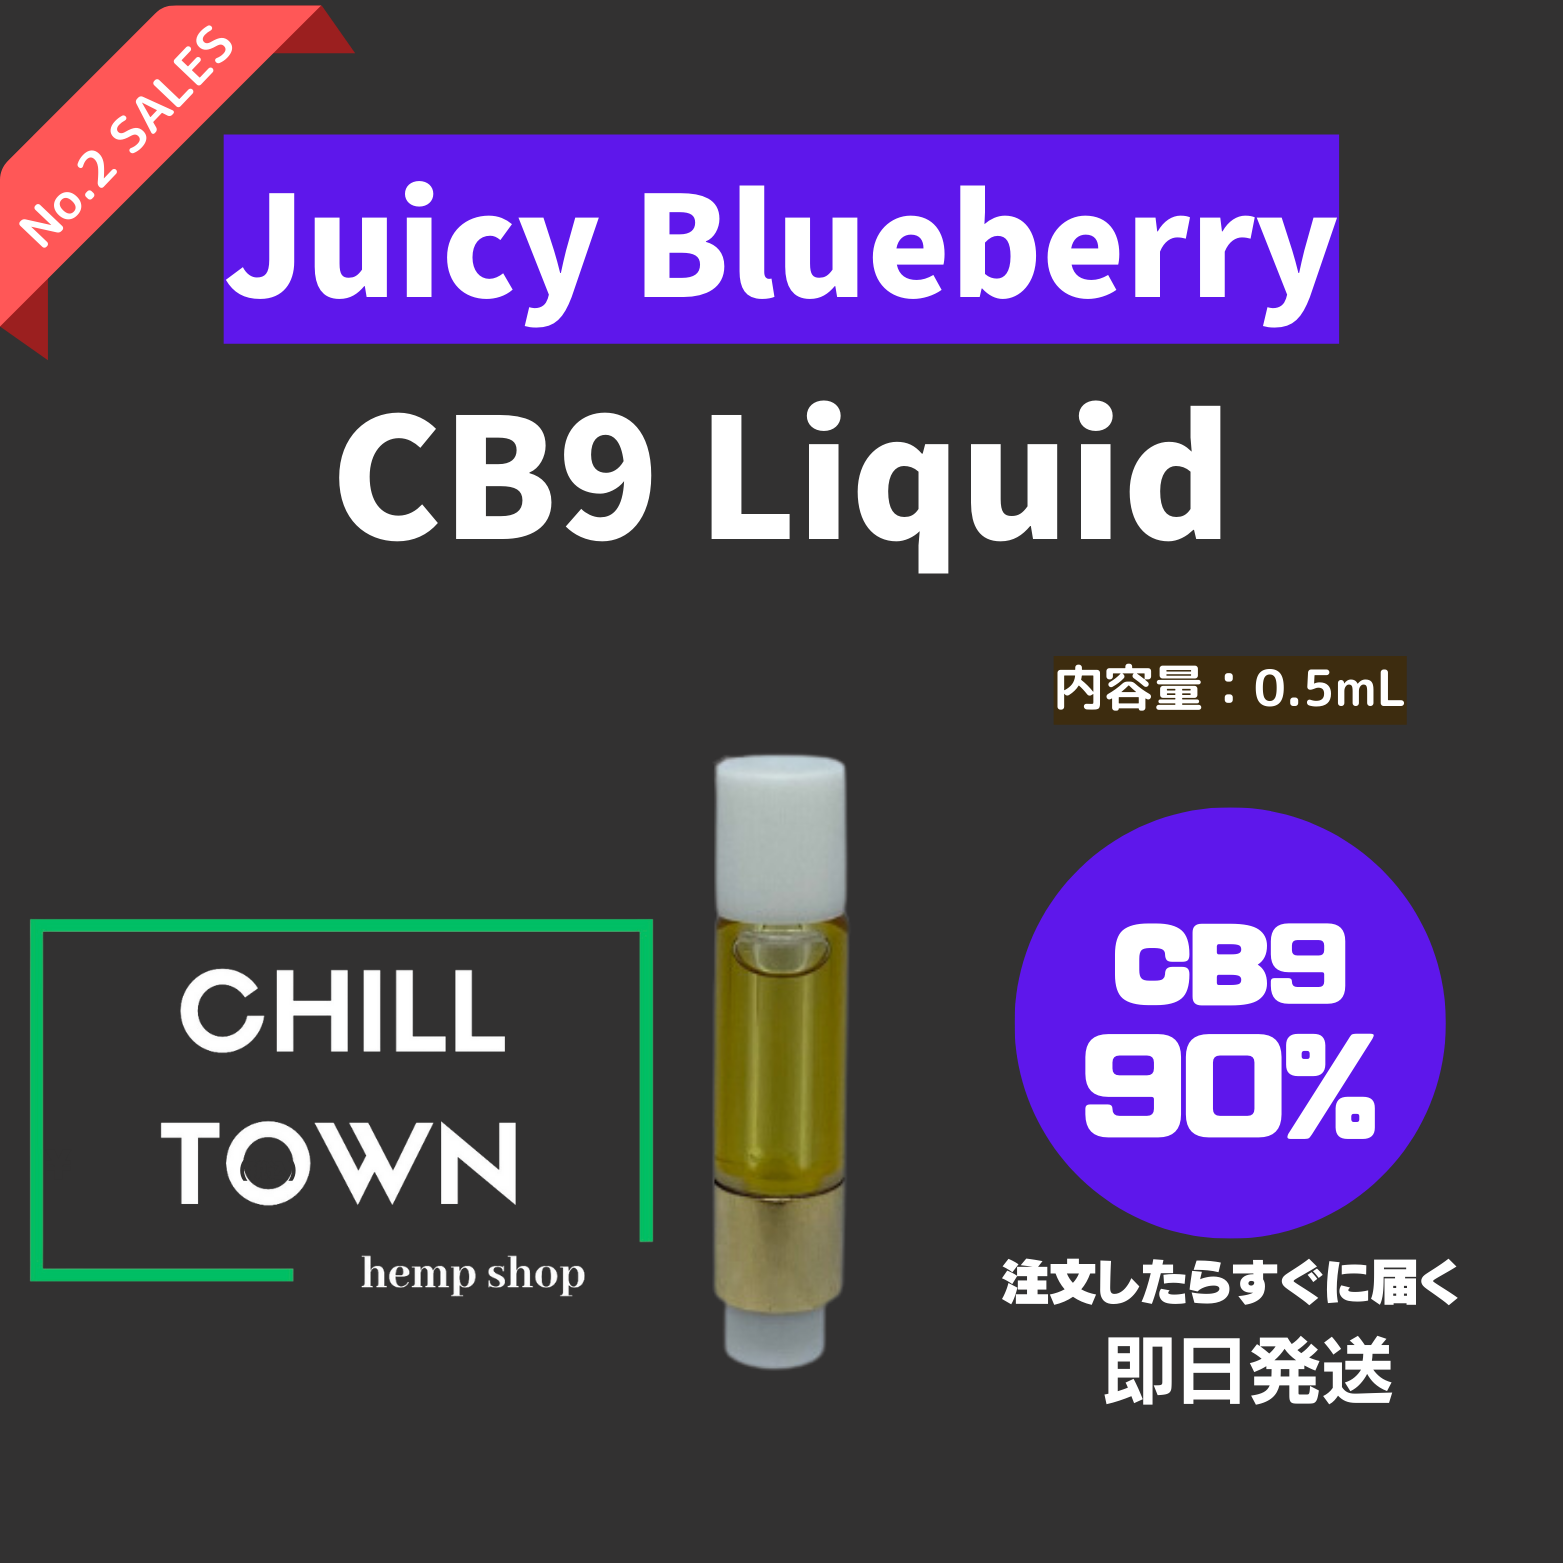 CB9リキッド90% (Juicy Blueberry) – CHILL TOWN